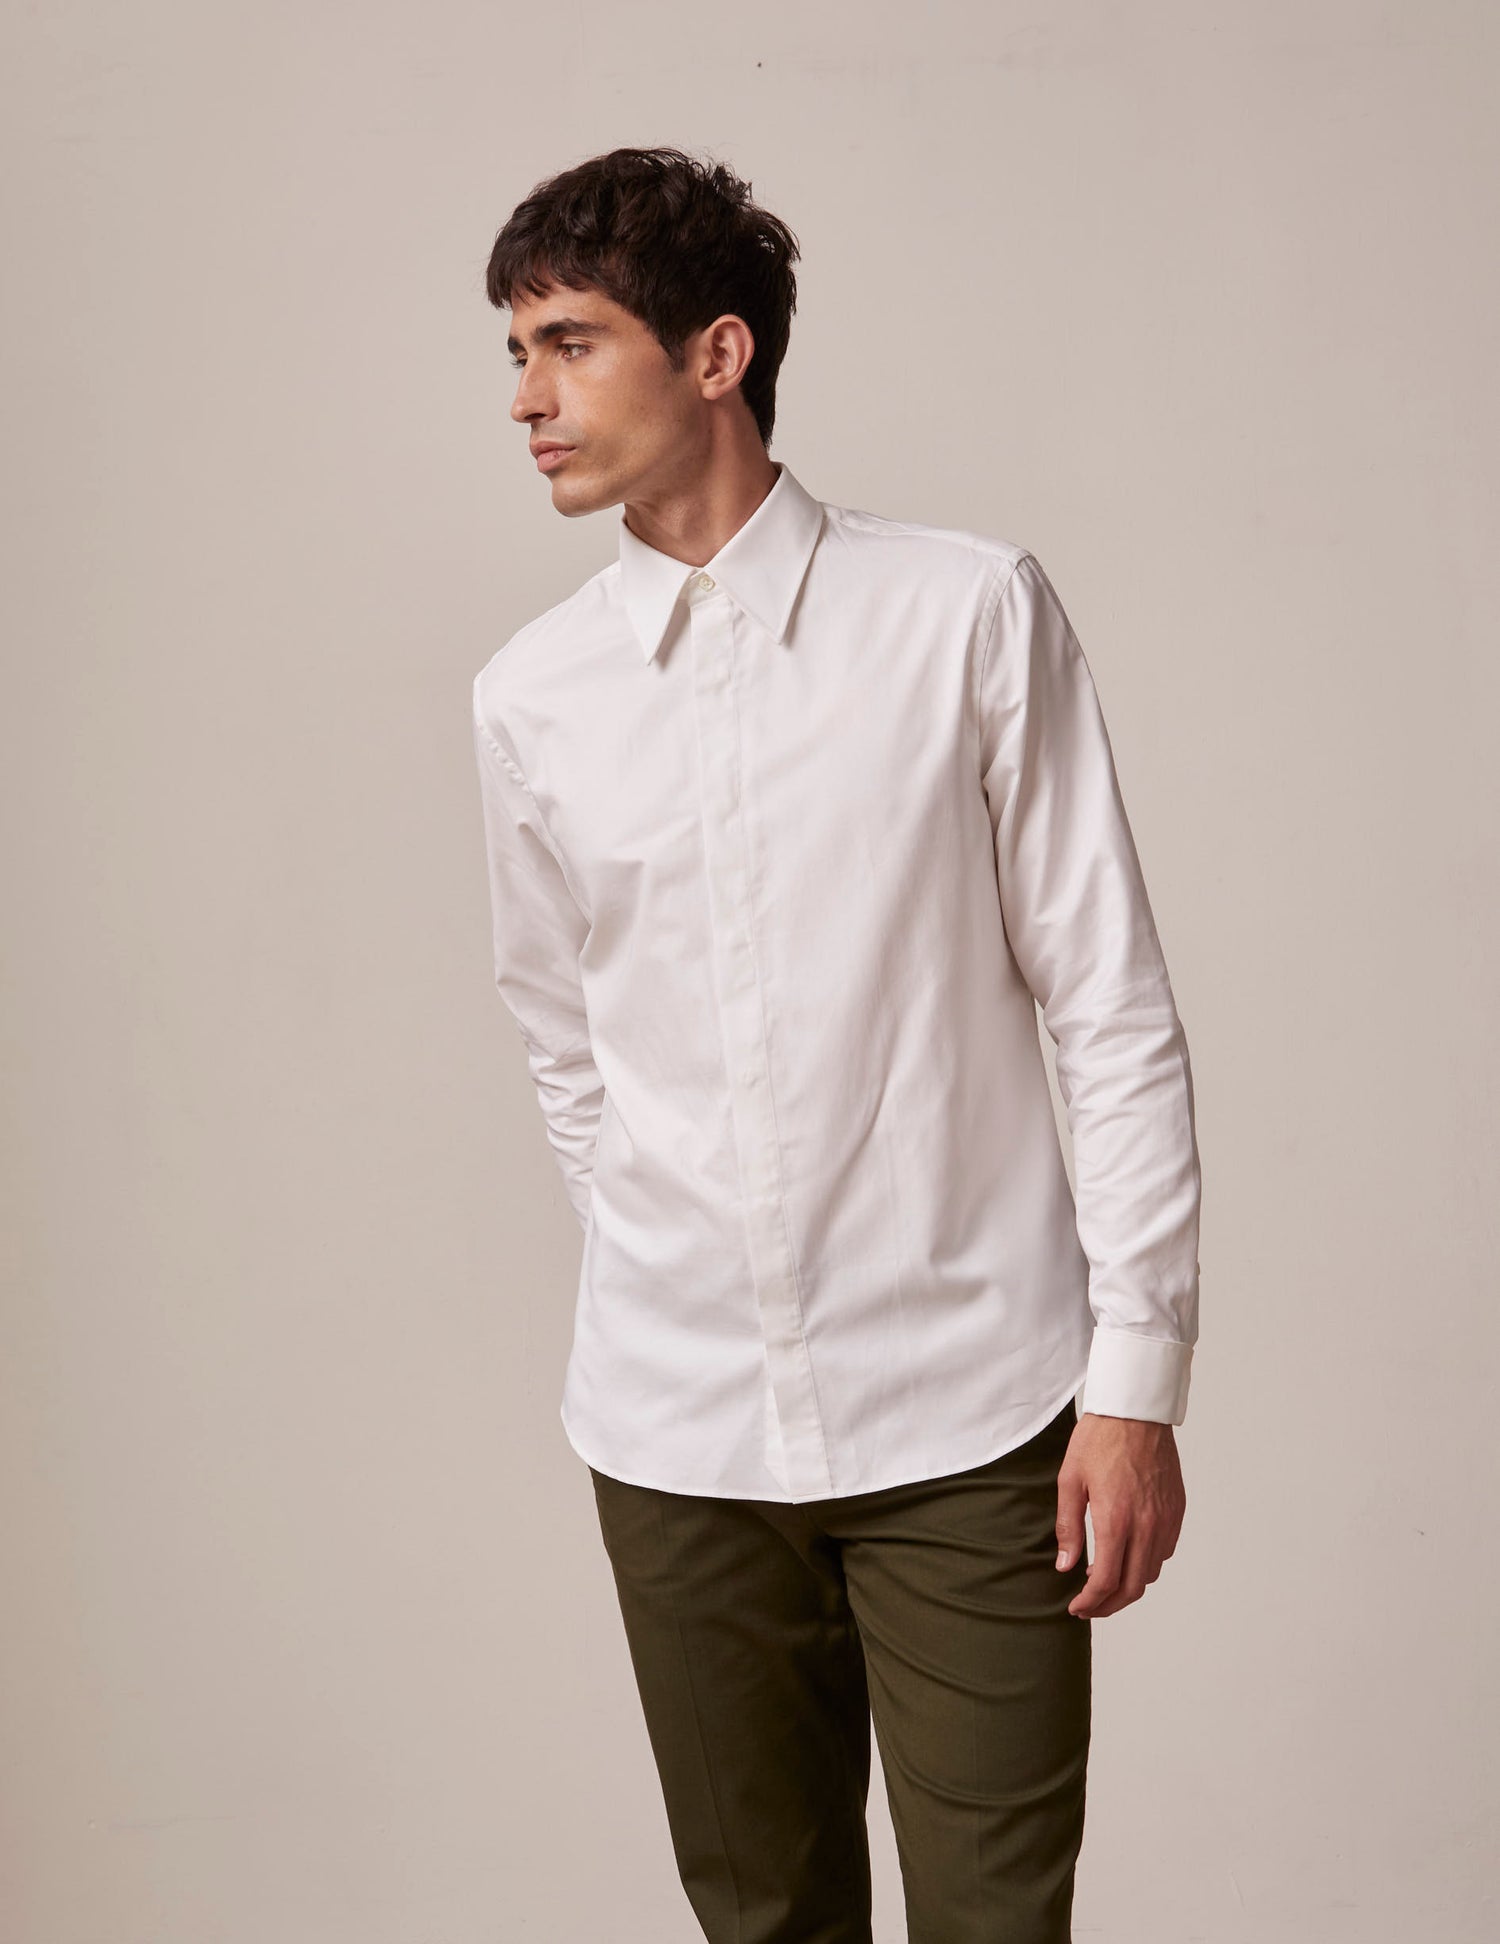 White semi-fitted shirt with hidden button placket - pin point - Majestic Collar - Musketeers Cuffs#4